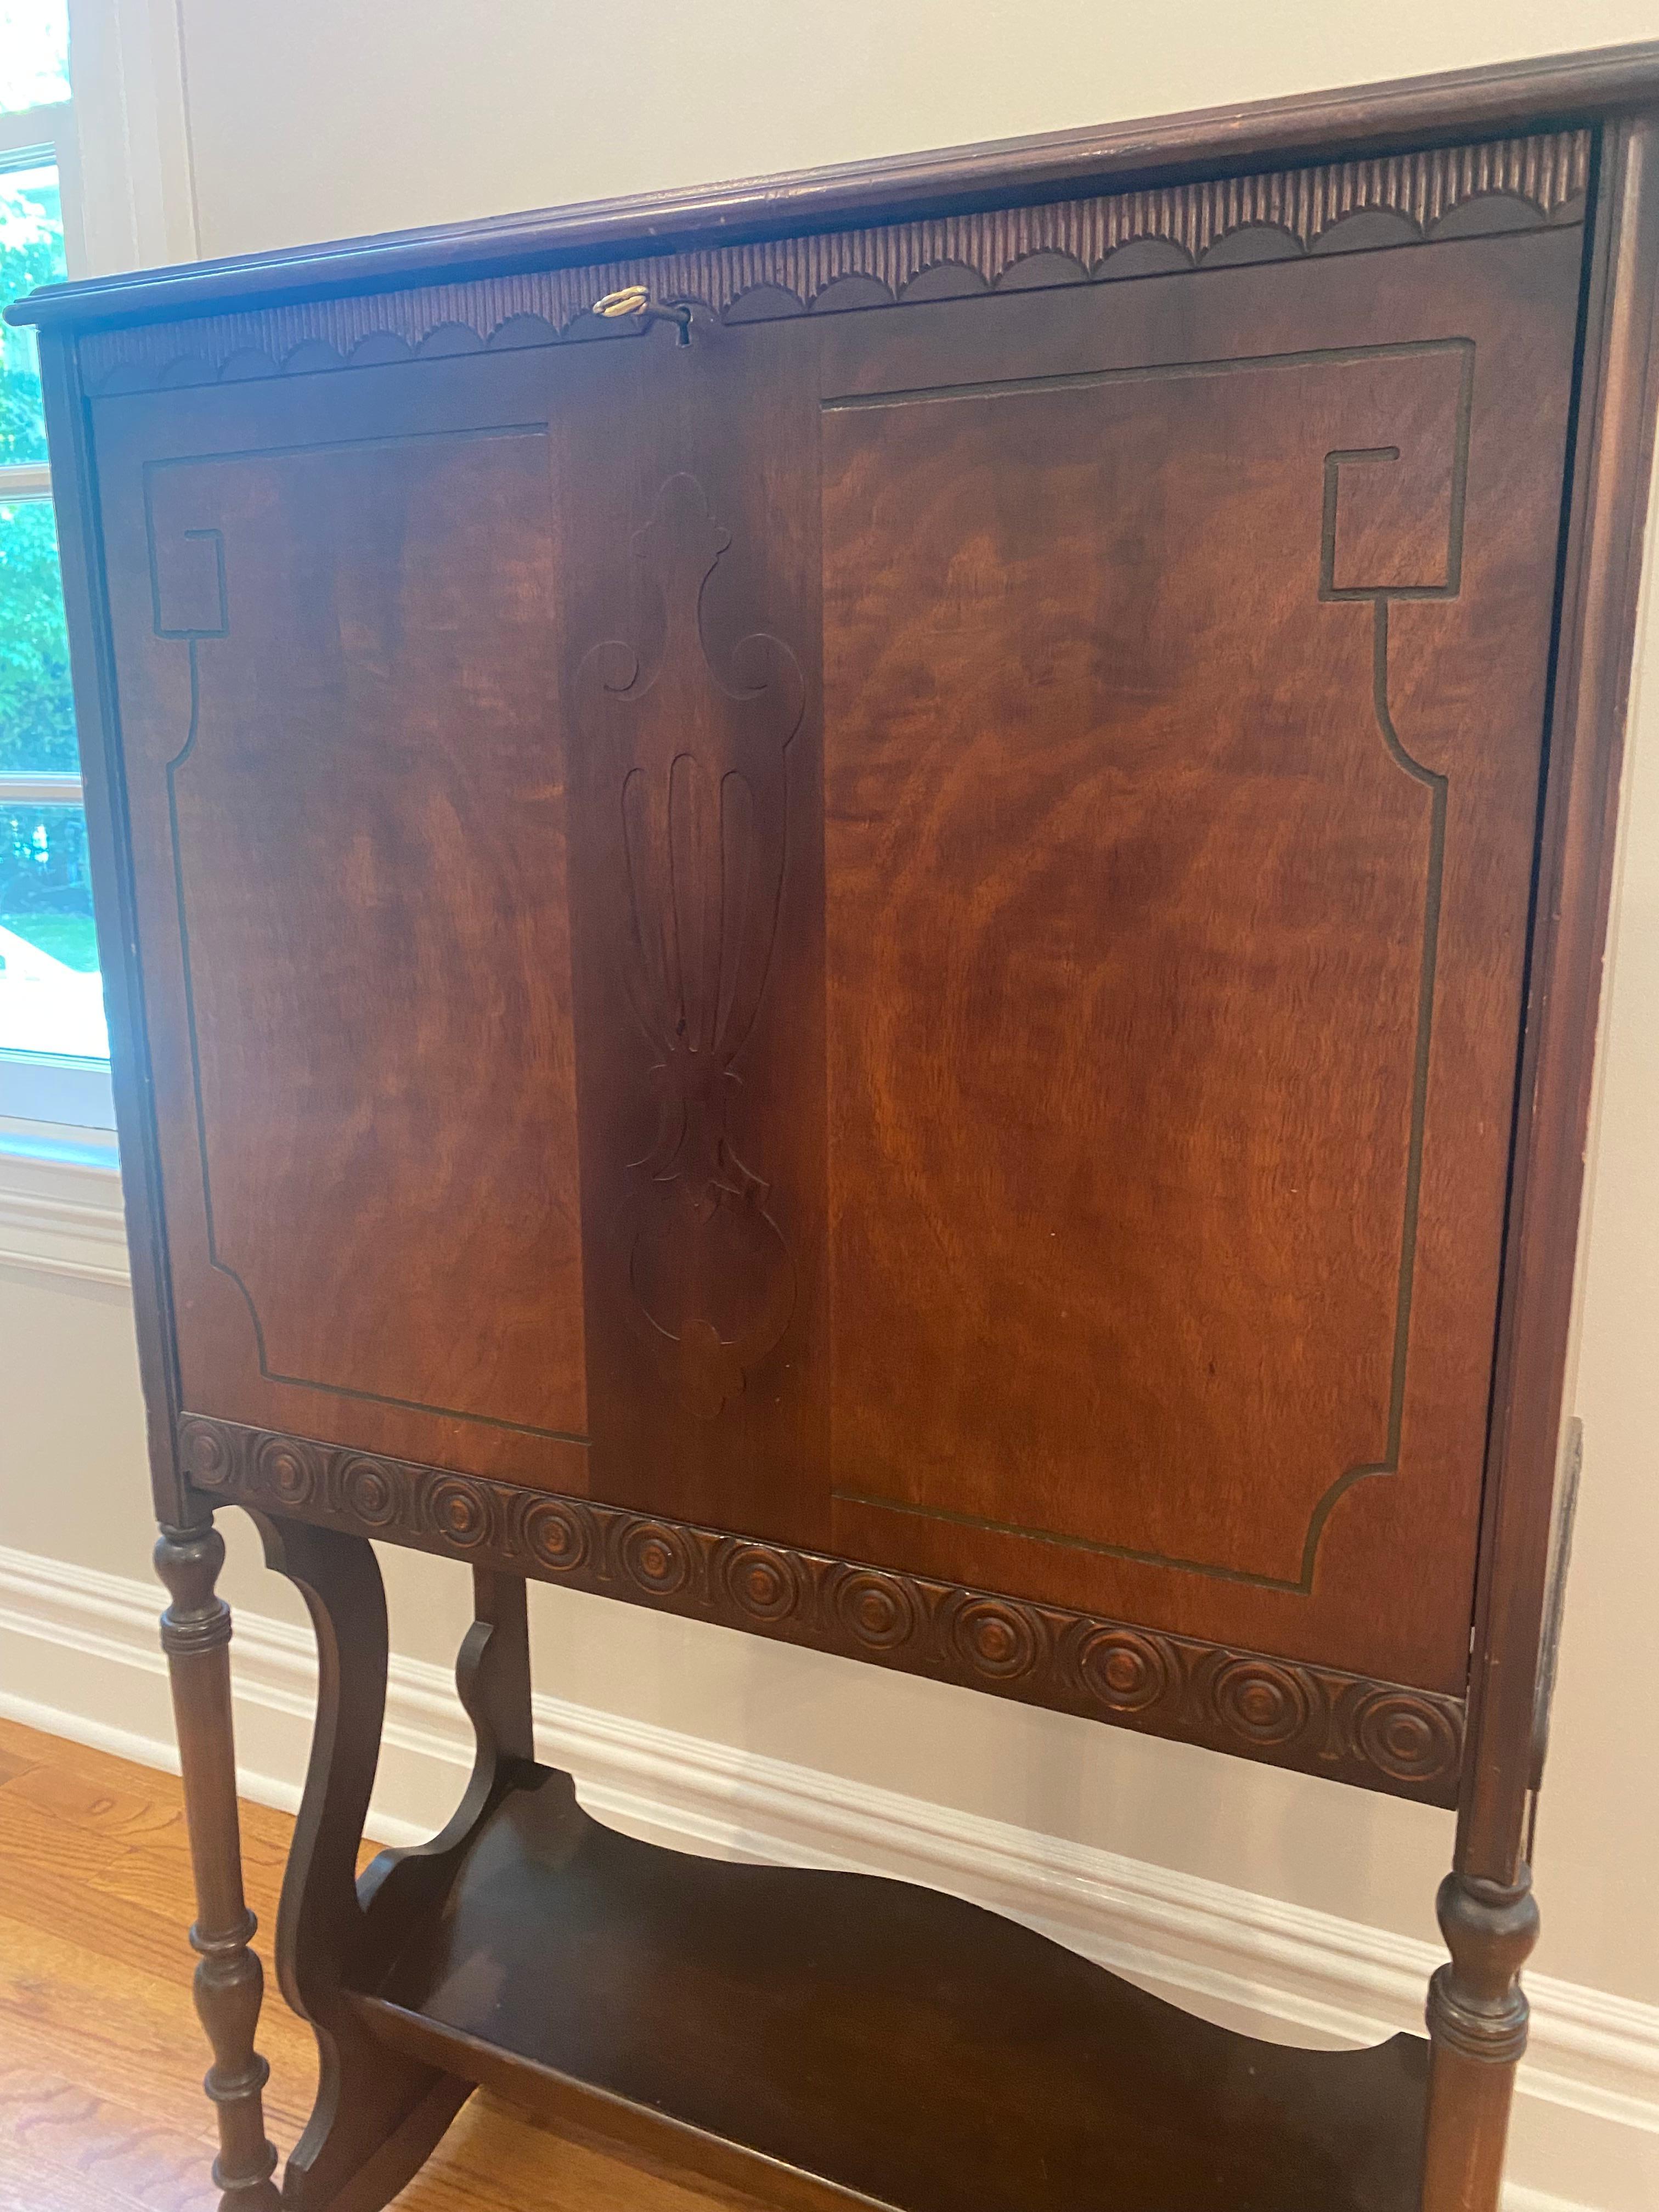 Vintage wood tall secretary having pretty flat front with carved wood decoration and urn shape in the center. Lovely grain and particularly narrow depth. Turned legs have a lower tier for more storage. The front flips down to reveal a desk surface